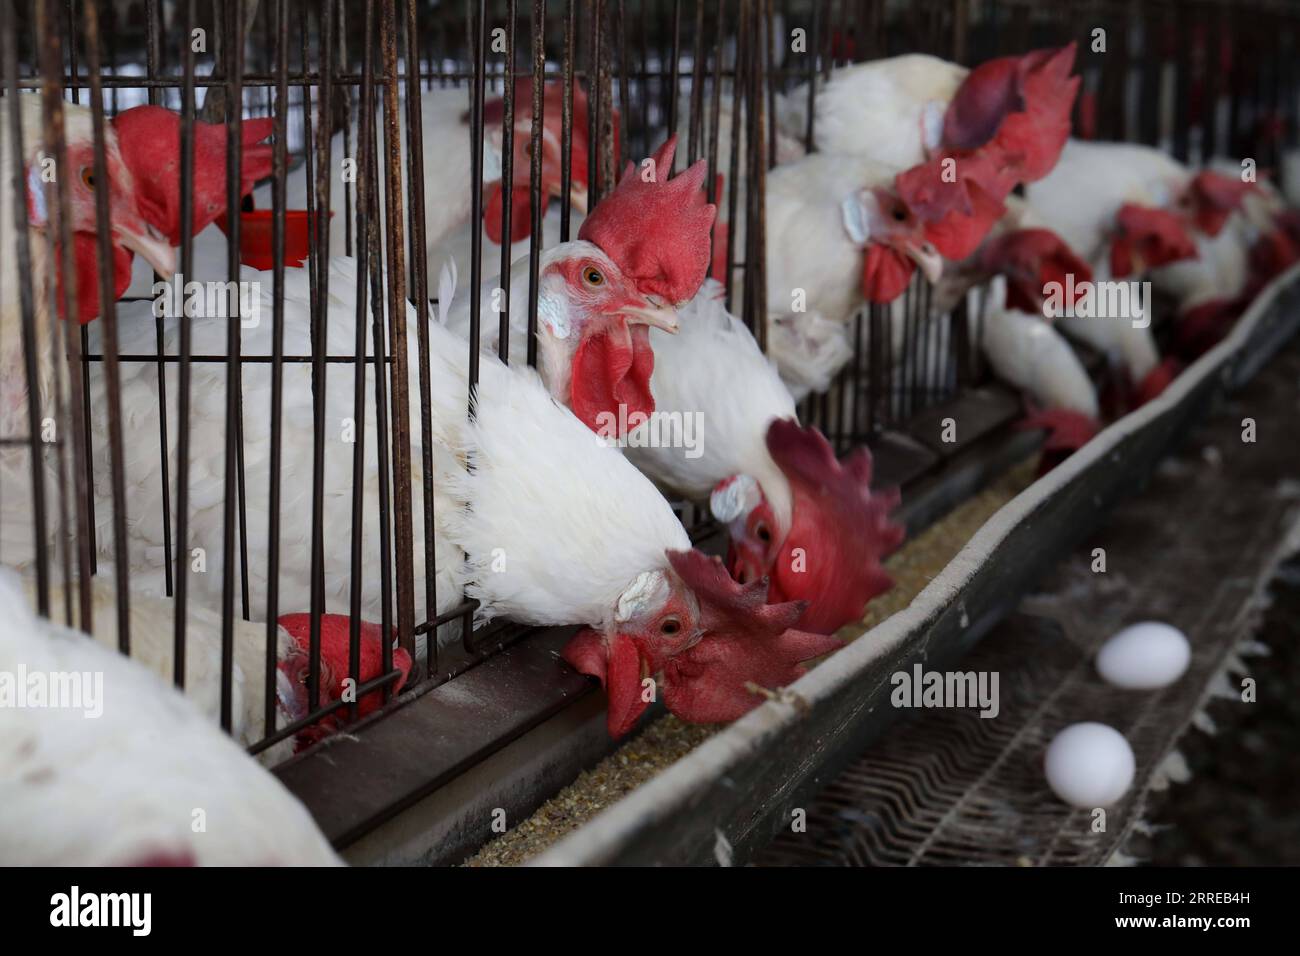 220216 -- KIRYAT MALAKHI, Feb. 16, 2022 -- White Leghorn egg-laying chickens are seen in cages in their hen house at Arugot village near Israeli city of Kiryat Malakhi on Feb. 15, 2022. Israel s Ministry of Agriculture and Rural Development on Monday announced new regulations regarding the use of hen cages in the egg industry. The regulations stipulate that from now on every new hen coop must be without cages, and from June 2029, any use of cage coops in the country will be banned. Photo by /Xinhua ISRAEL-KIRYAT MALAKHI-CHICKENS GilxCohenxMagen PUBLICATIONxNOTxINxCHN 220216 -- KIRYAT MALAKHI, Stock Photo